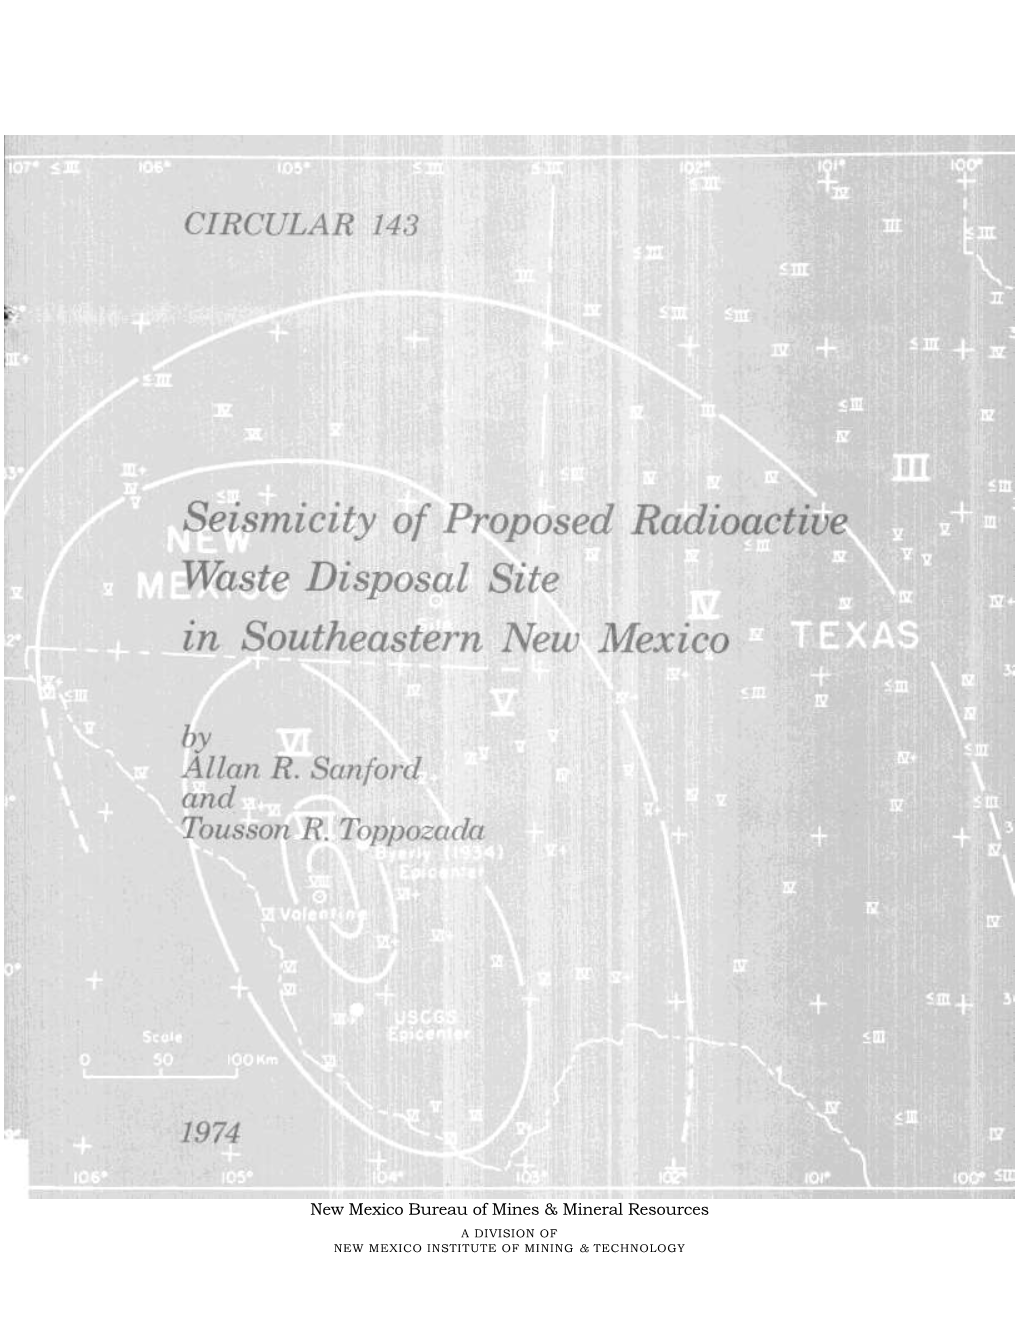 Seismicity of Proposed Radioactive Waste Disposal Site in Southeastern New Mexico